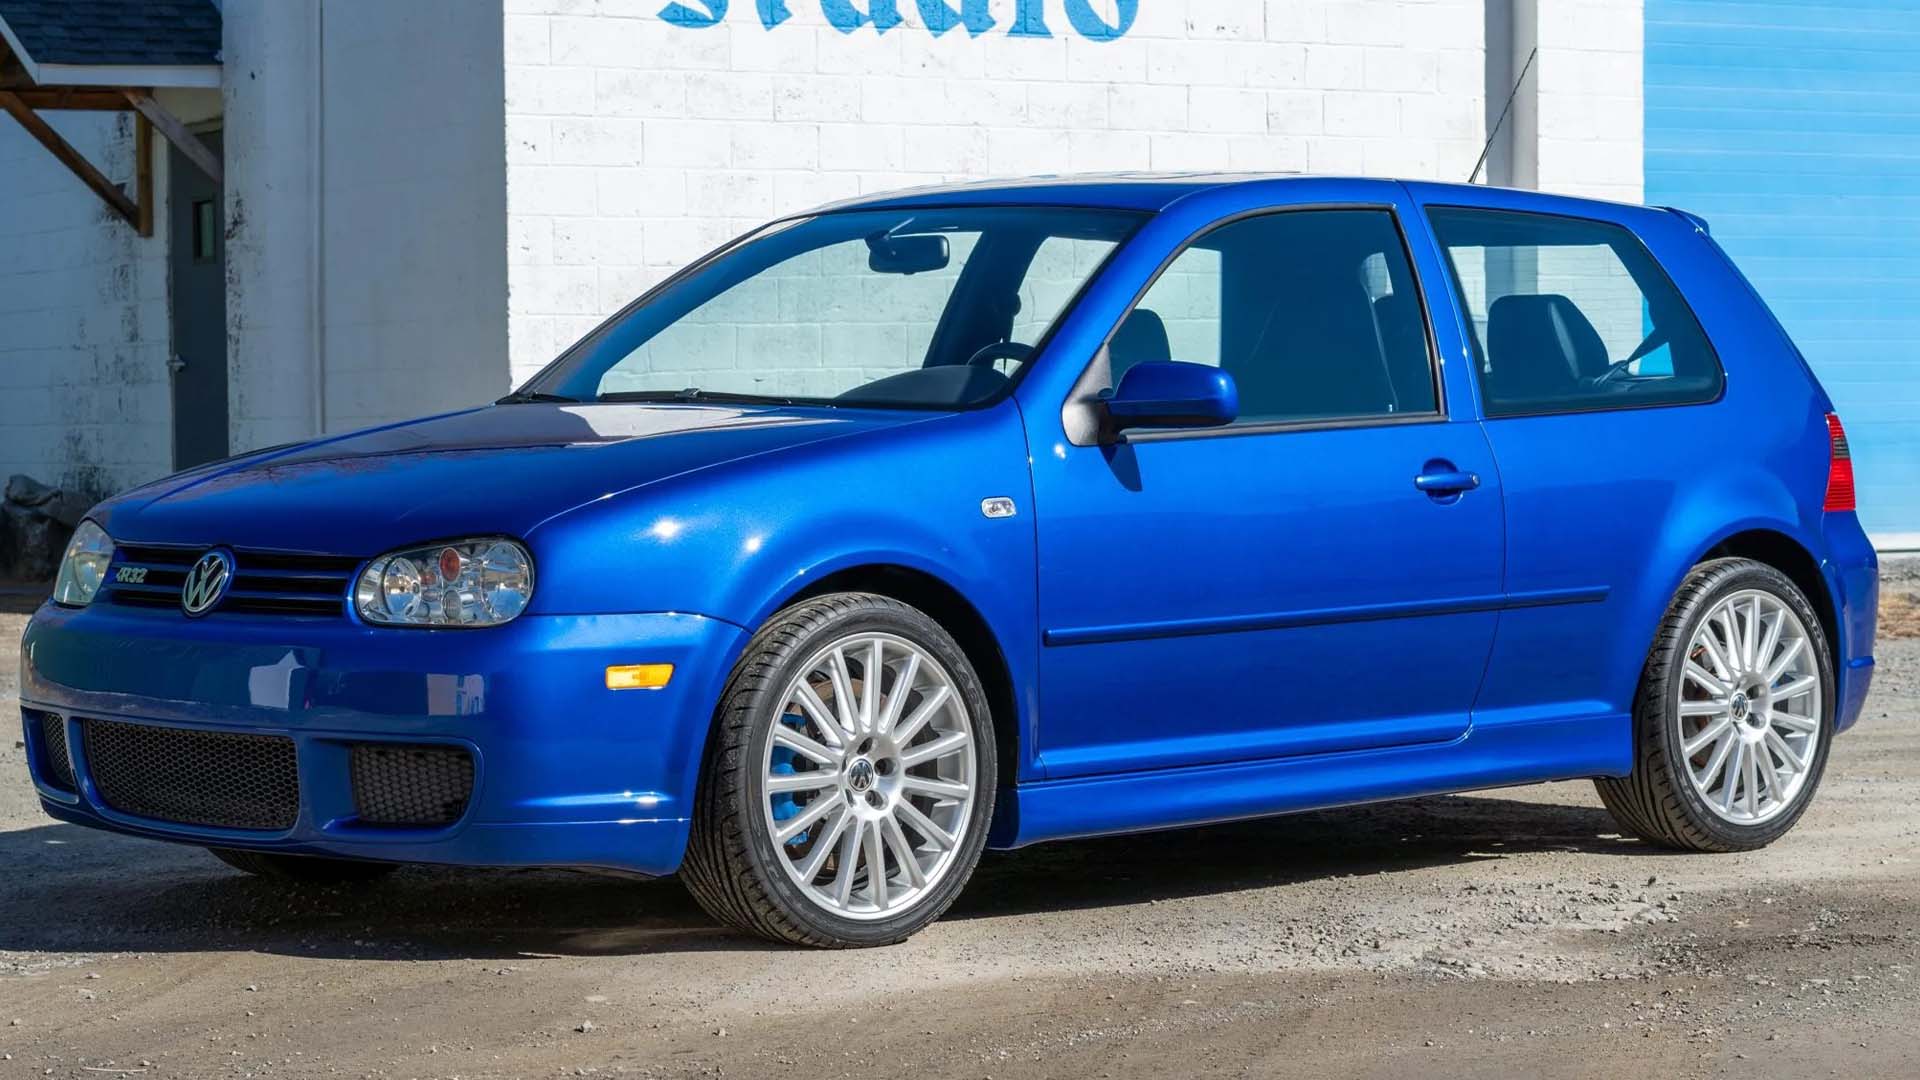 Ride Like It's 2001 With This Low-Mileage VW Golf Mk4 GTI